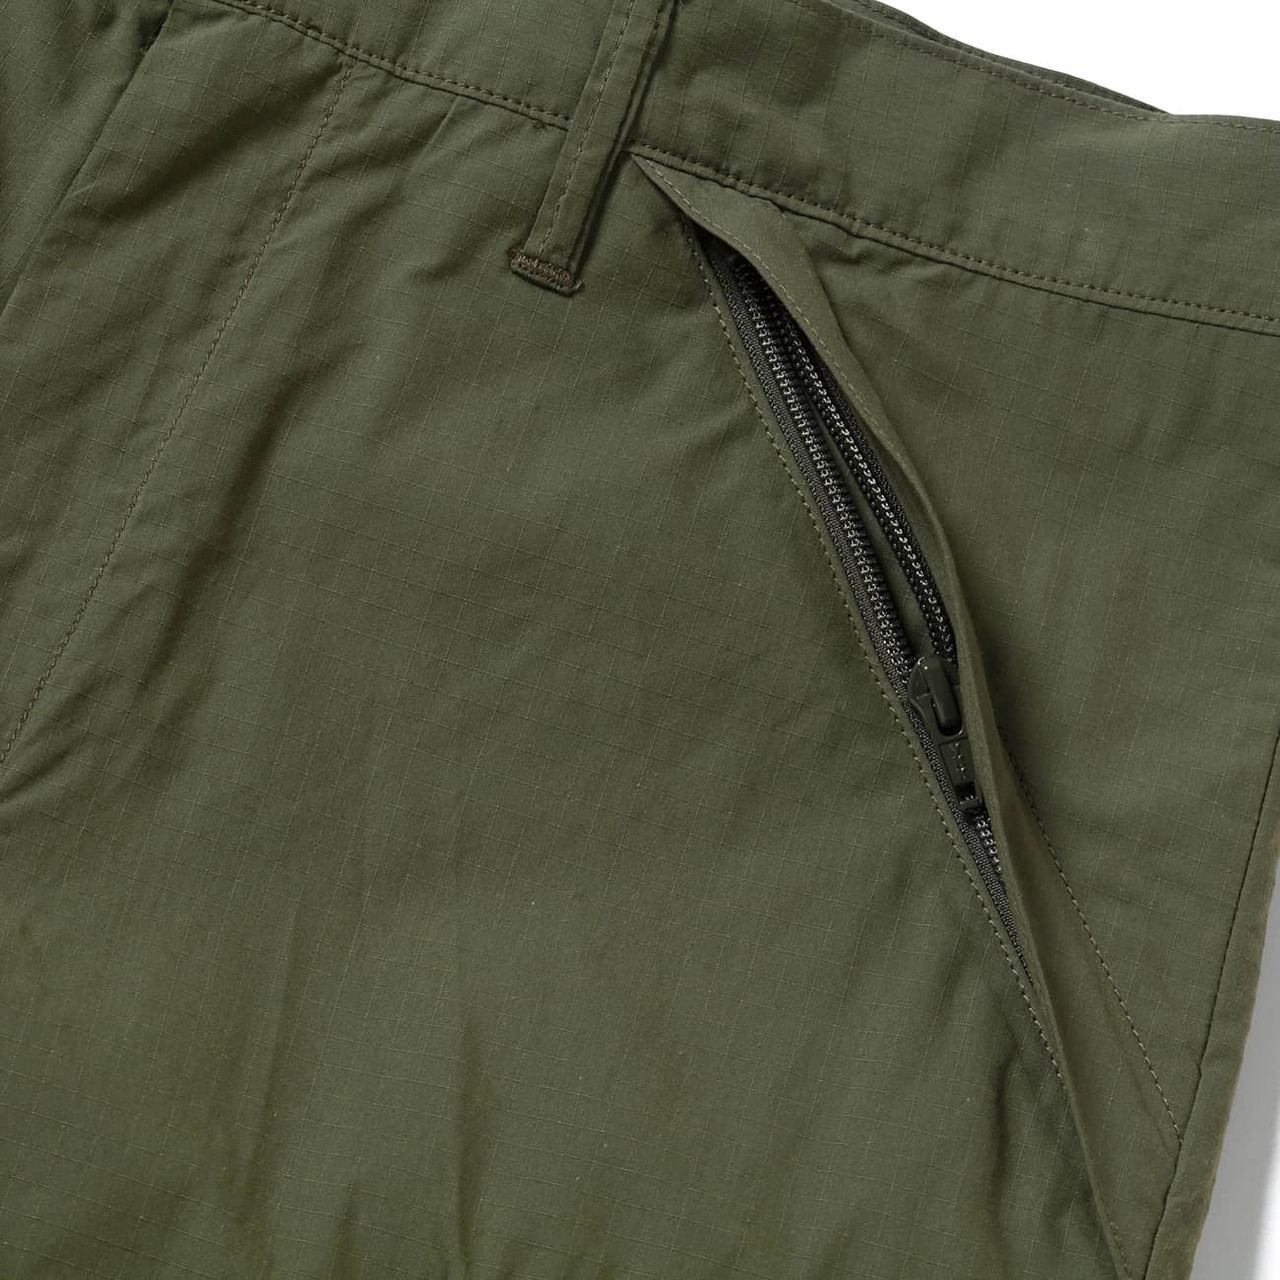 BGT / TROUSERS / NYCO. RIPSTOP. CORDURA® 222WVDT-PTM06